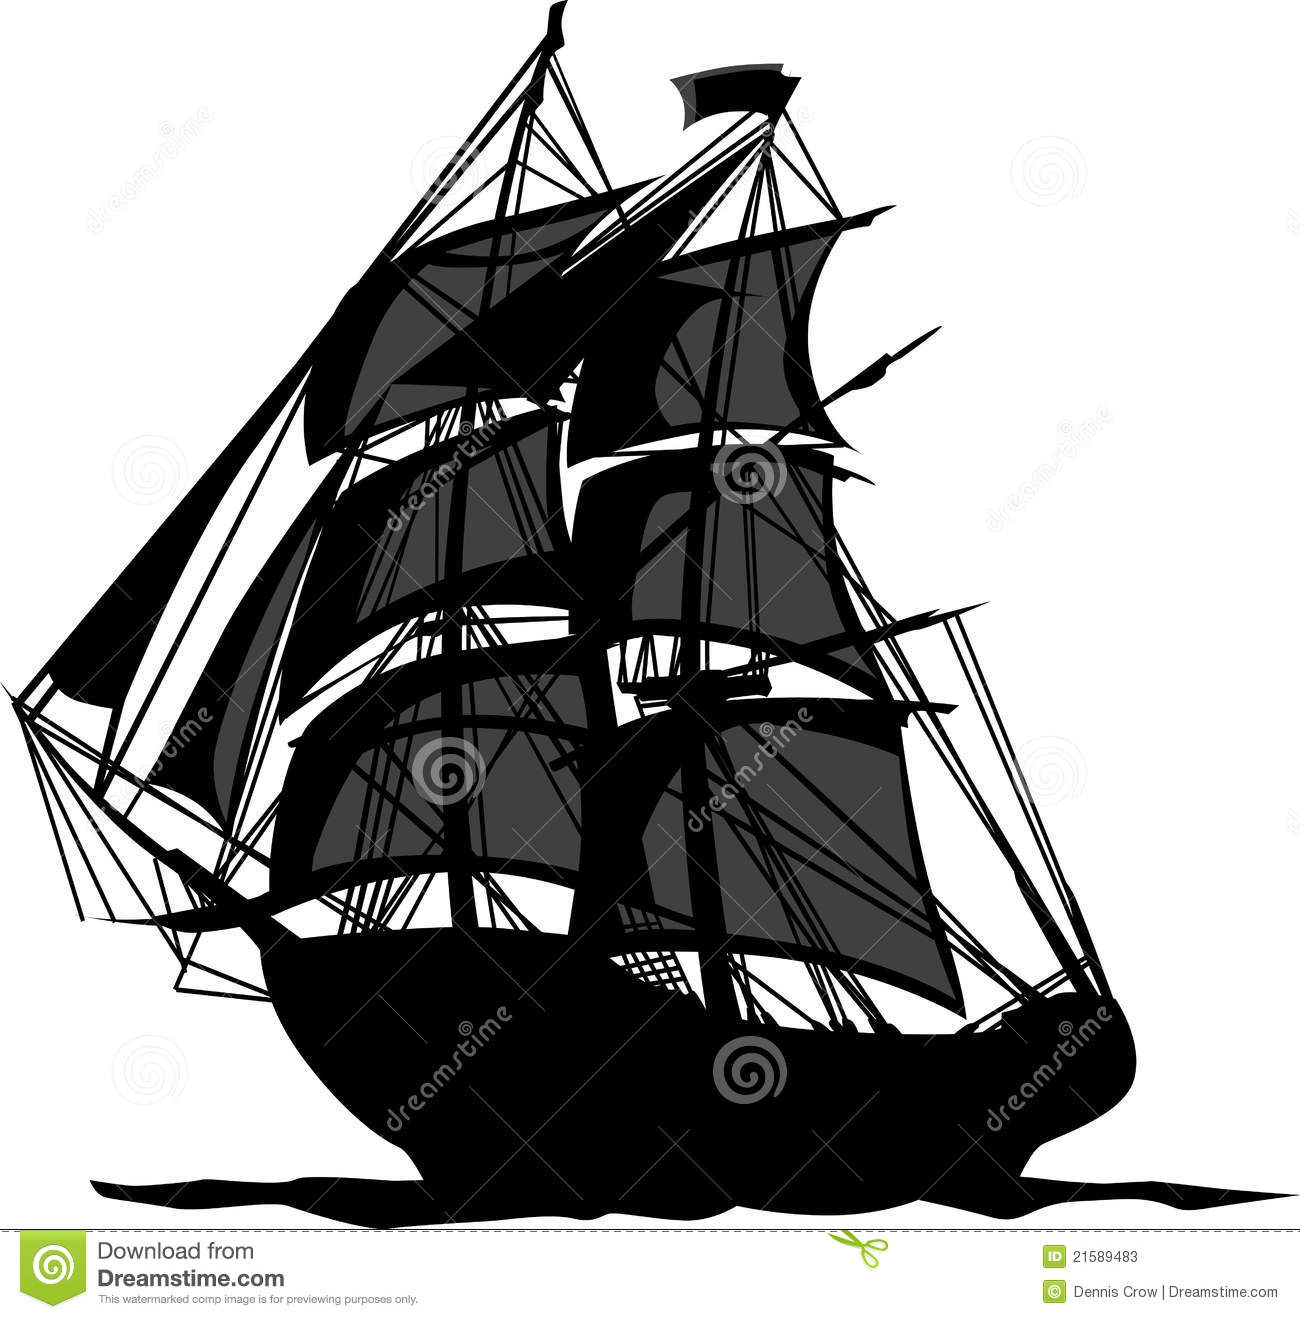 Sailing Pirate Ship With Sails Vector Graphic Image